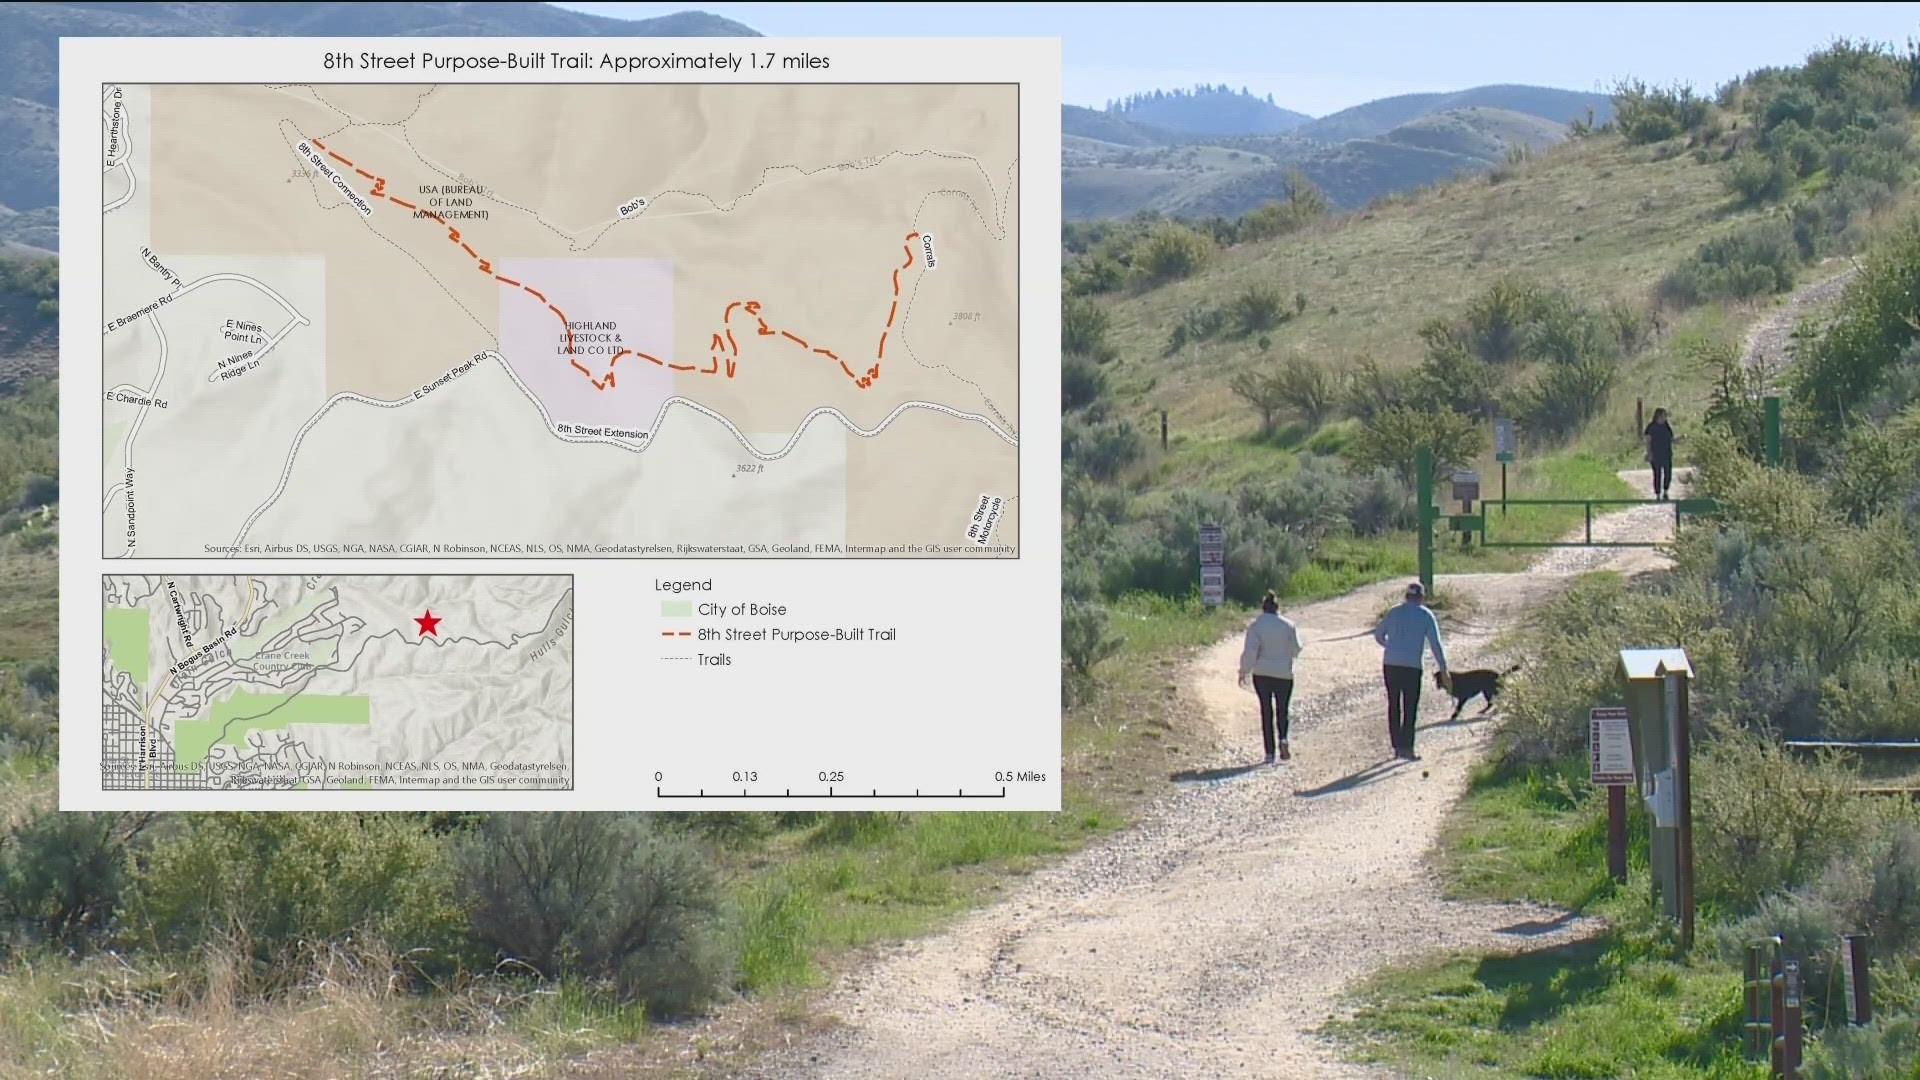 Lisa Duplessie with Boise Parks and Recreation and David Gordon with Ridge to Rivers spoke to KTVB about the new planned trails.